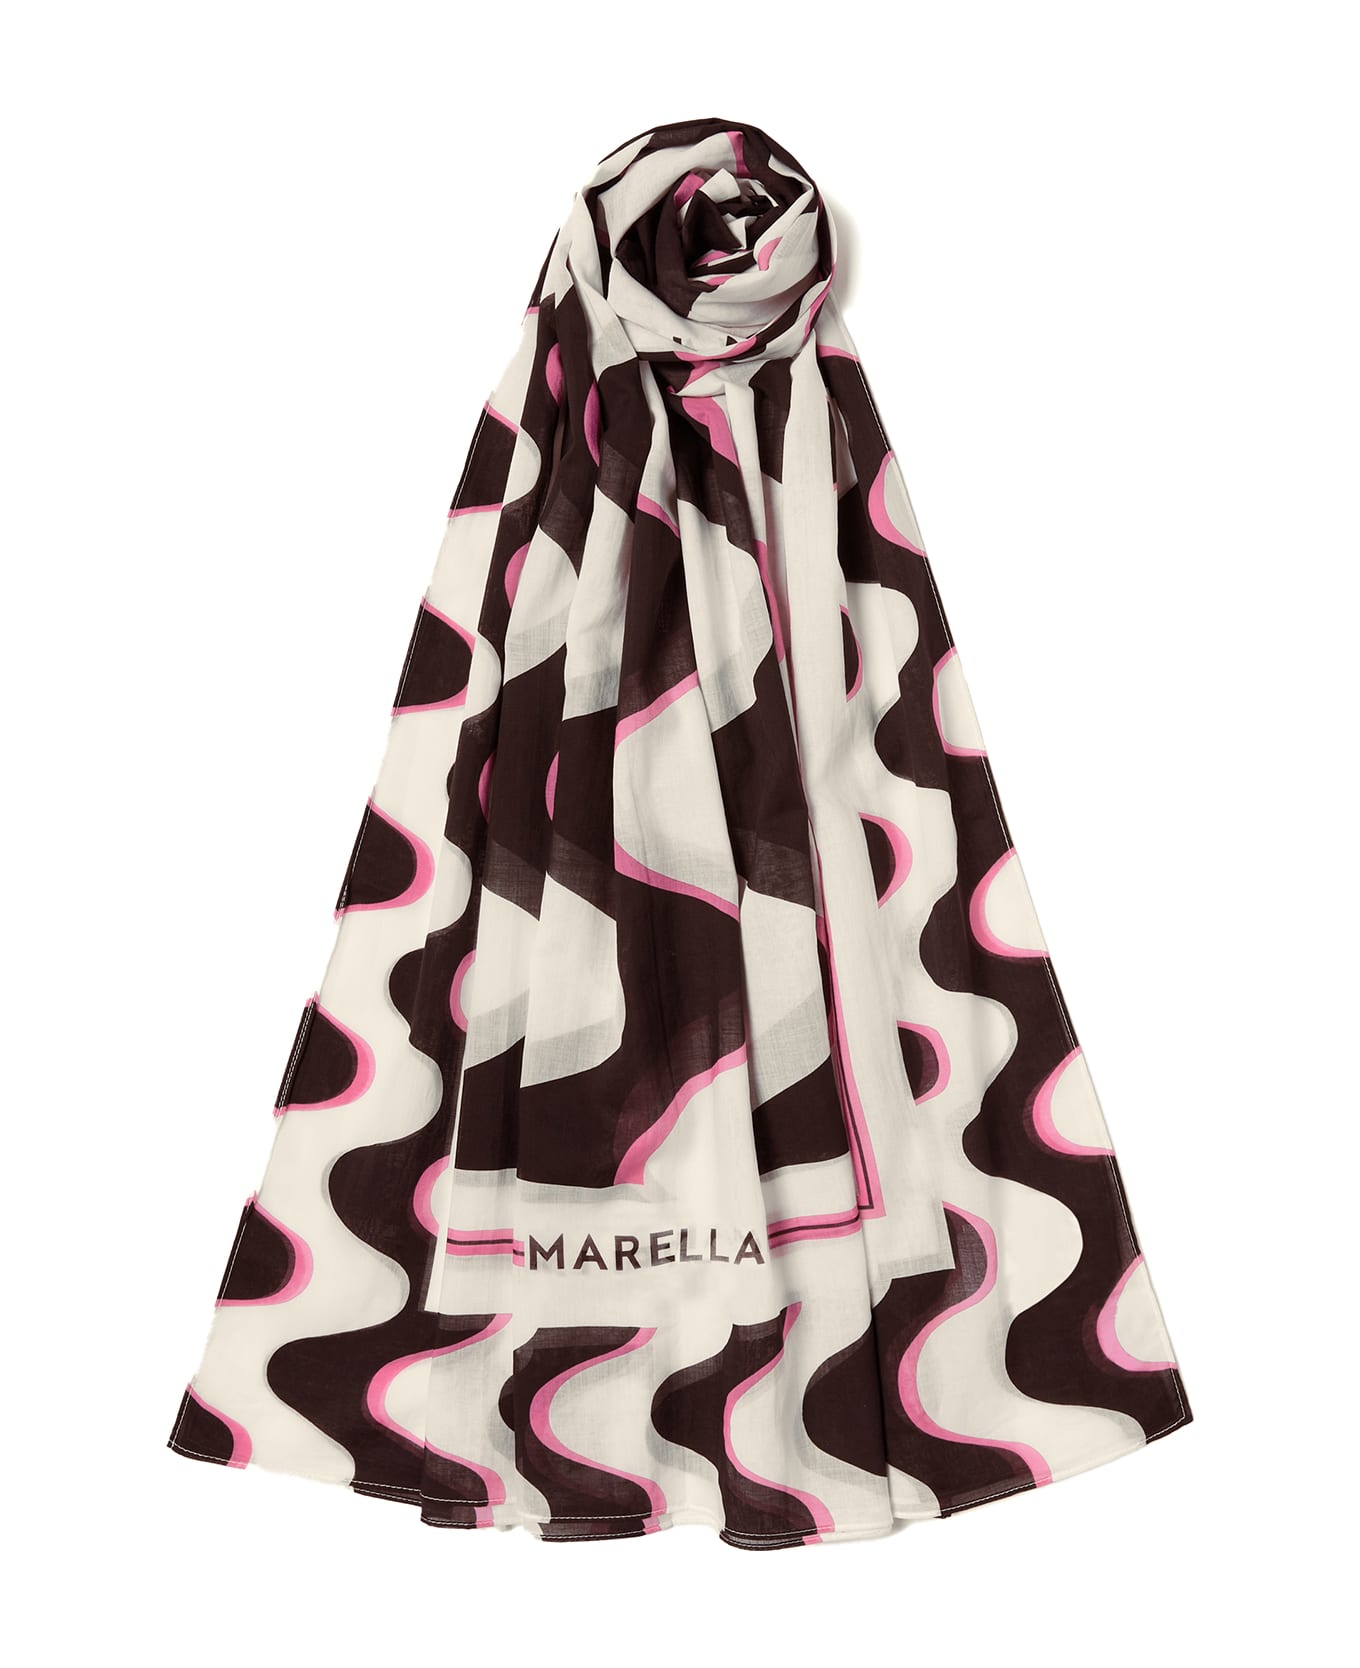 Marella Pink Brown Scarf - Save up to 40